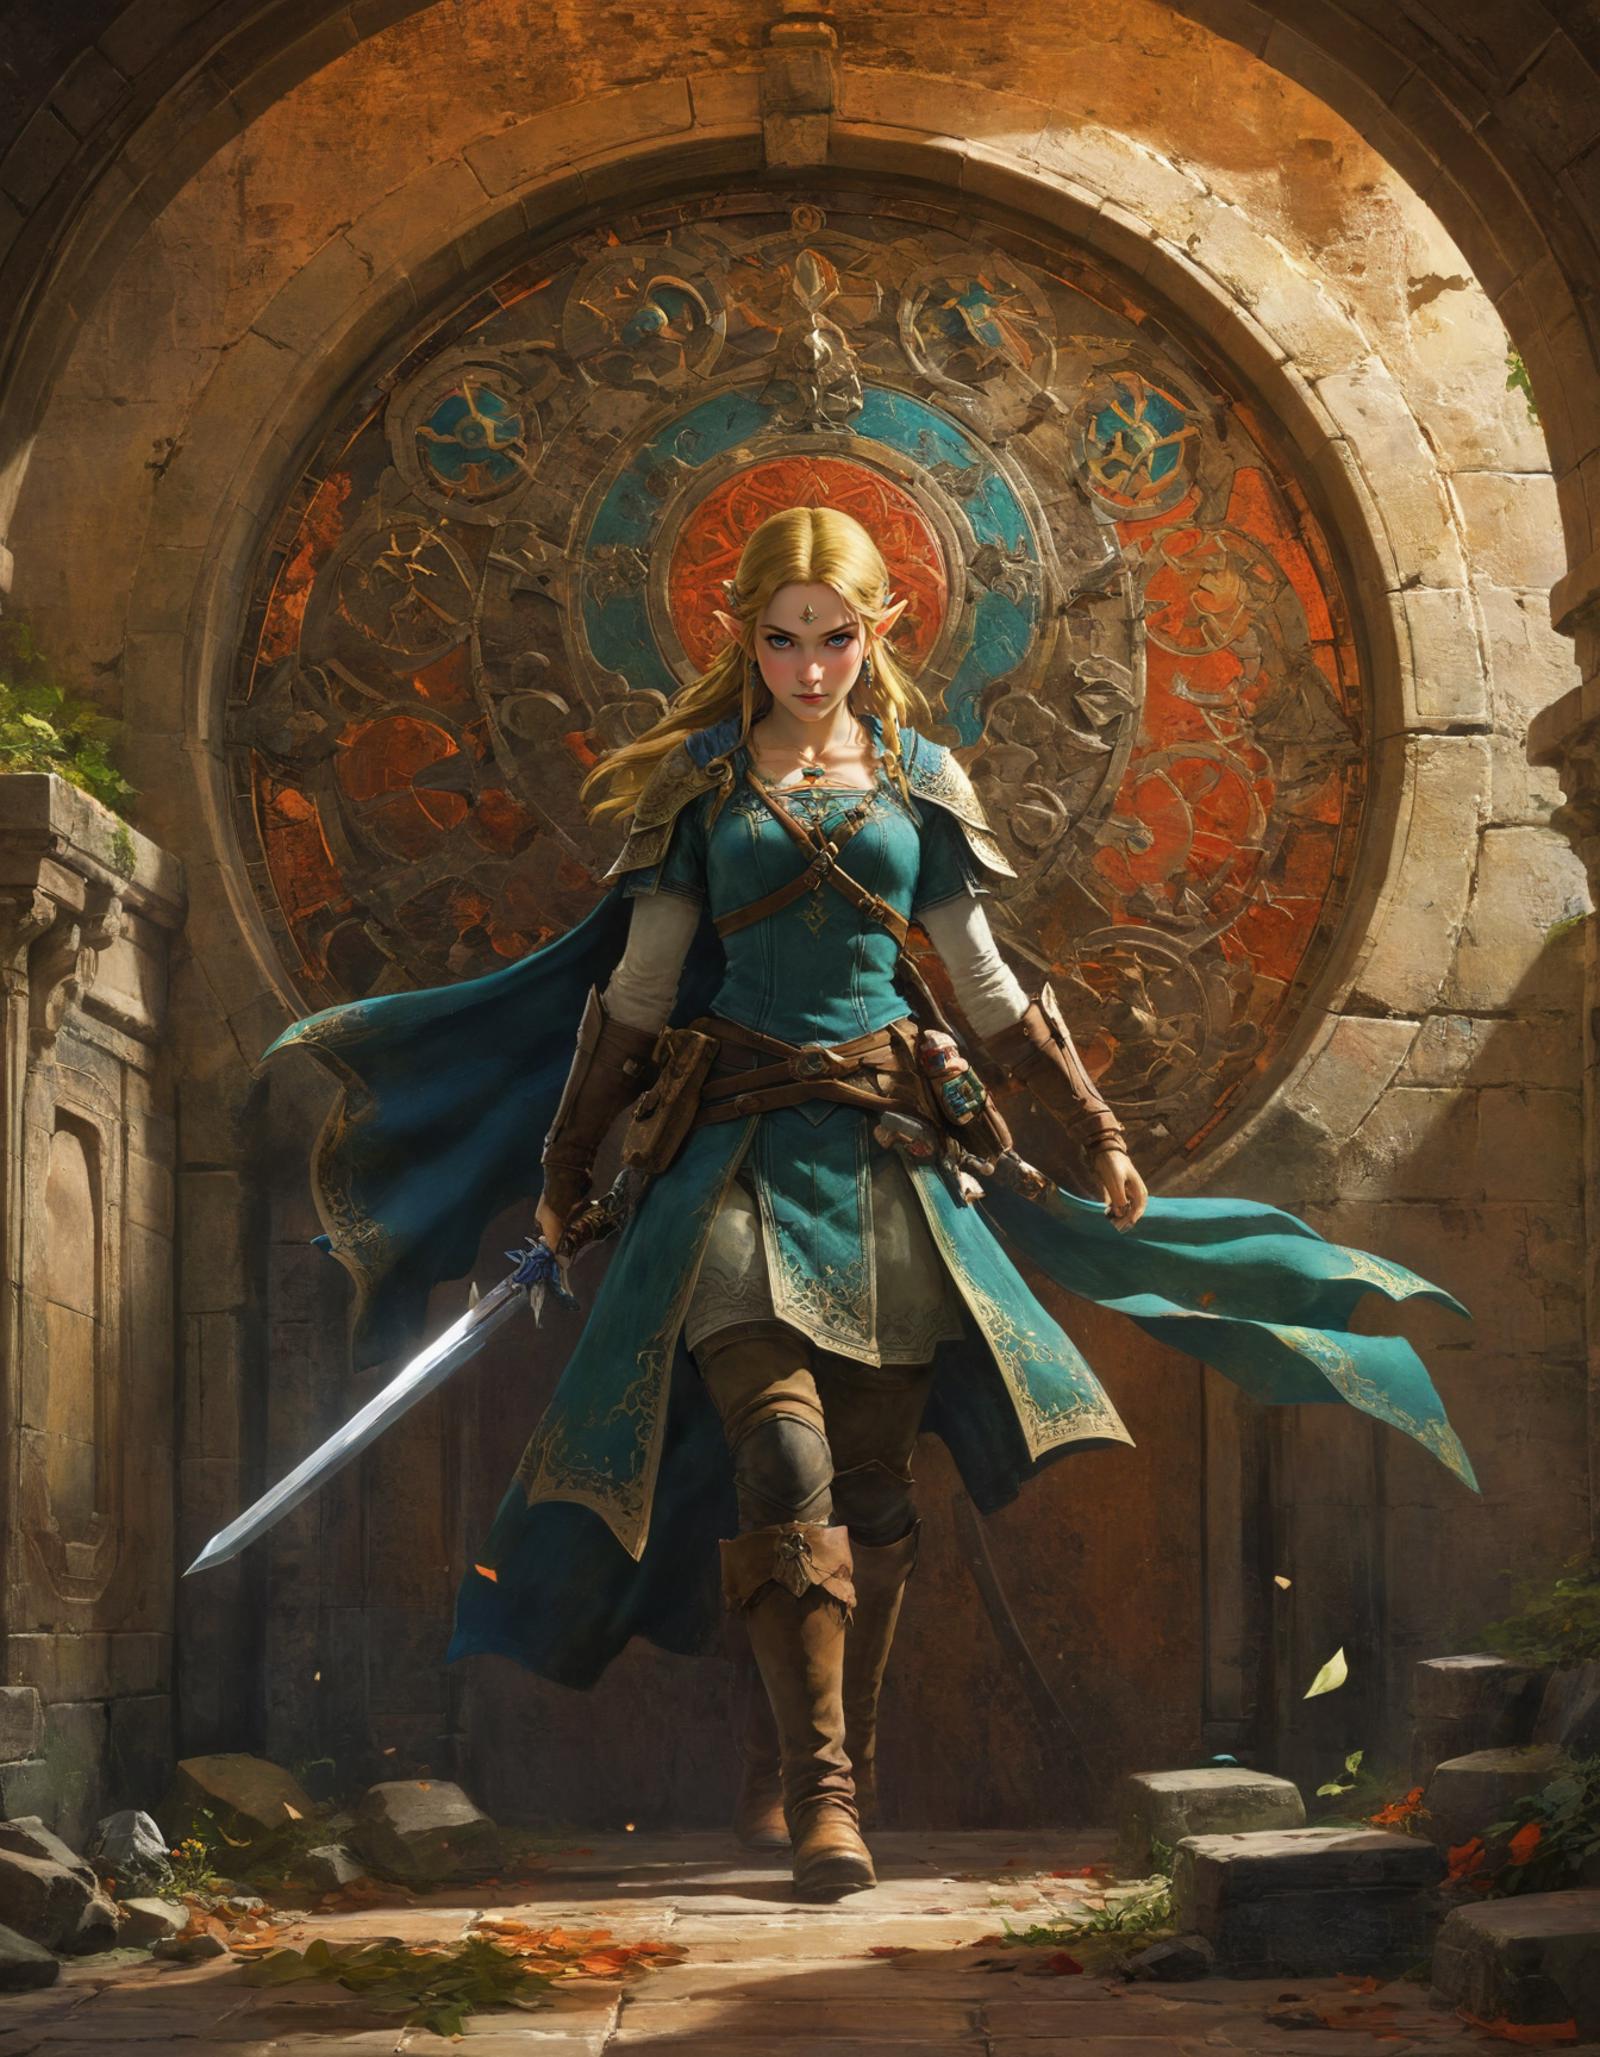 A woman in a fantasy scene, holding a sword and standing in front of a large round window.